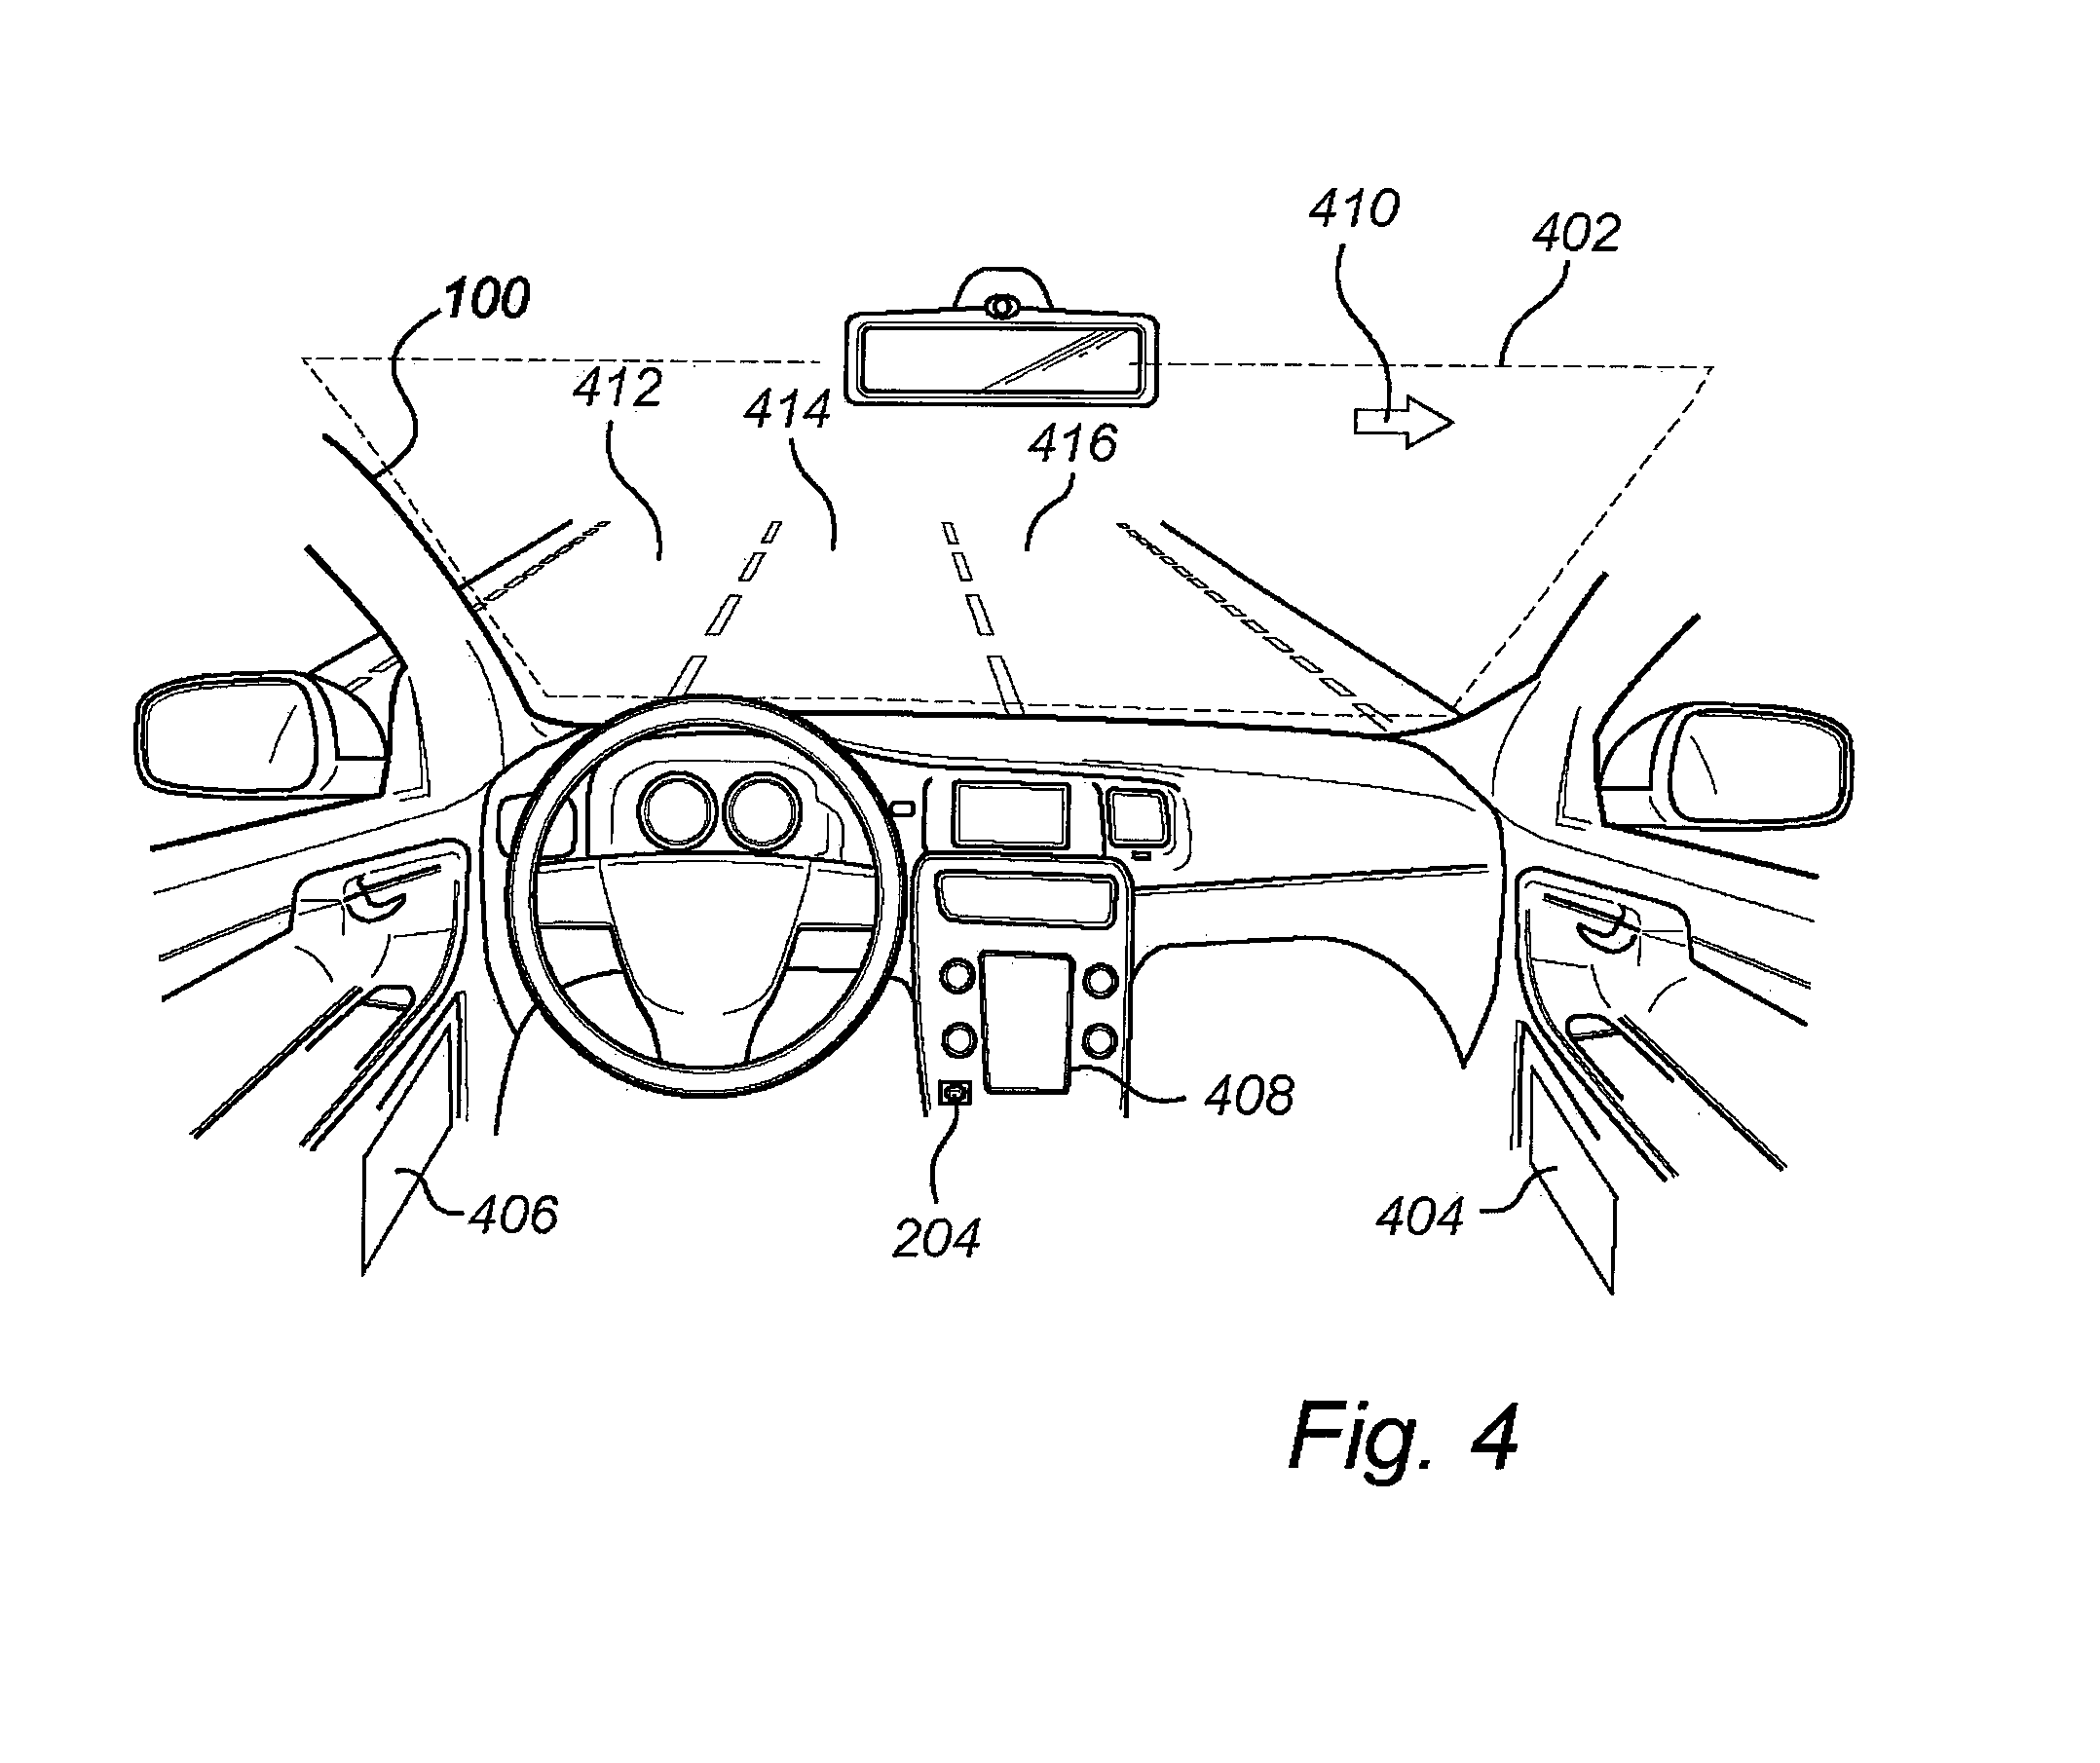 Method for providing a context based coaching message to a driver of a vehicle